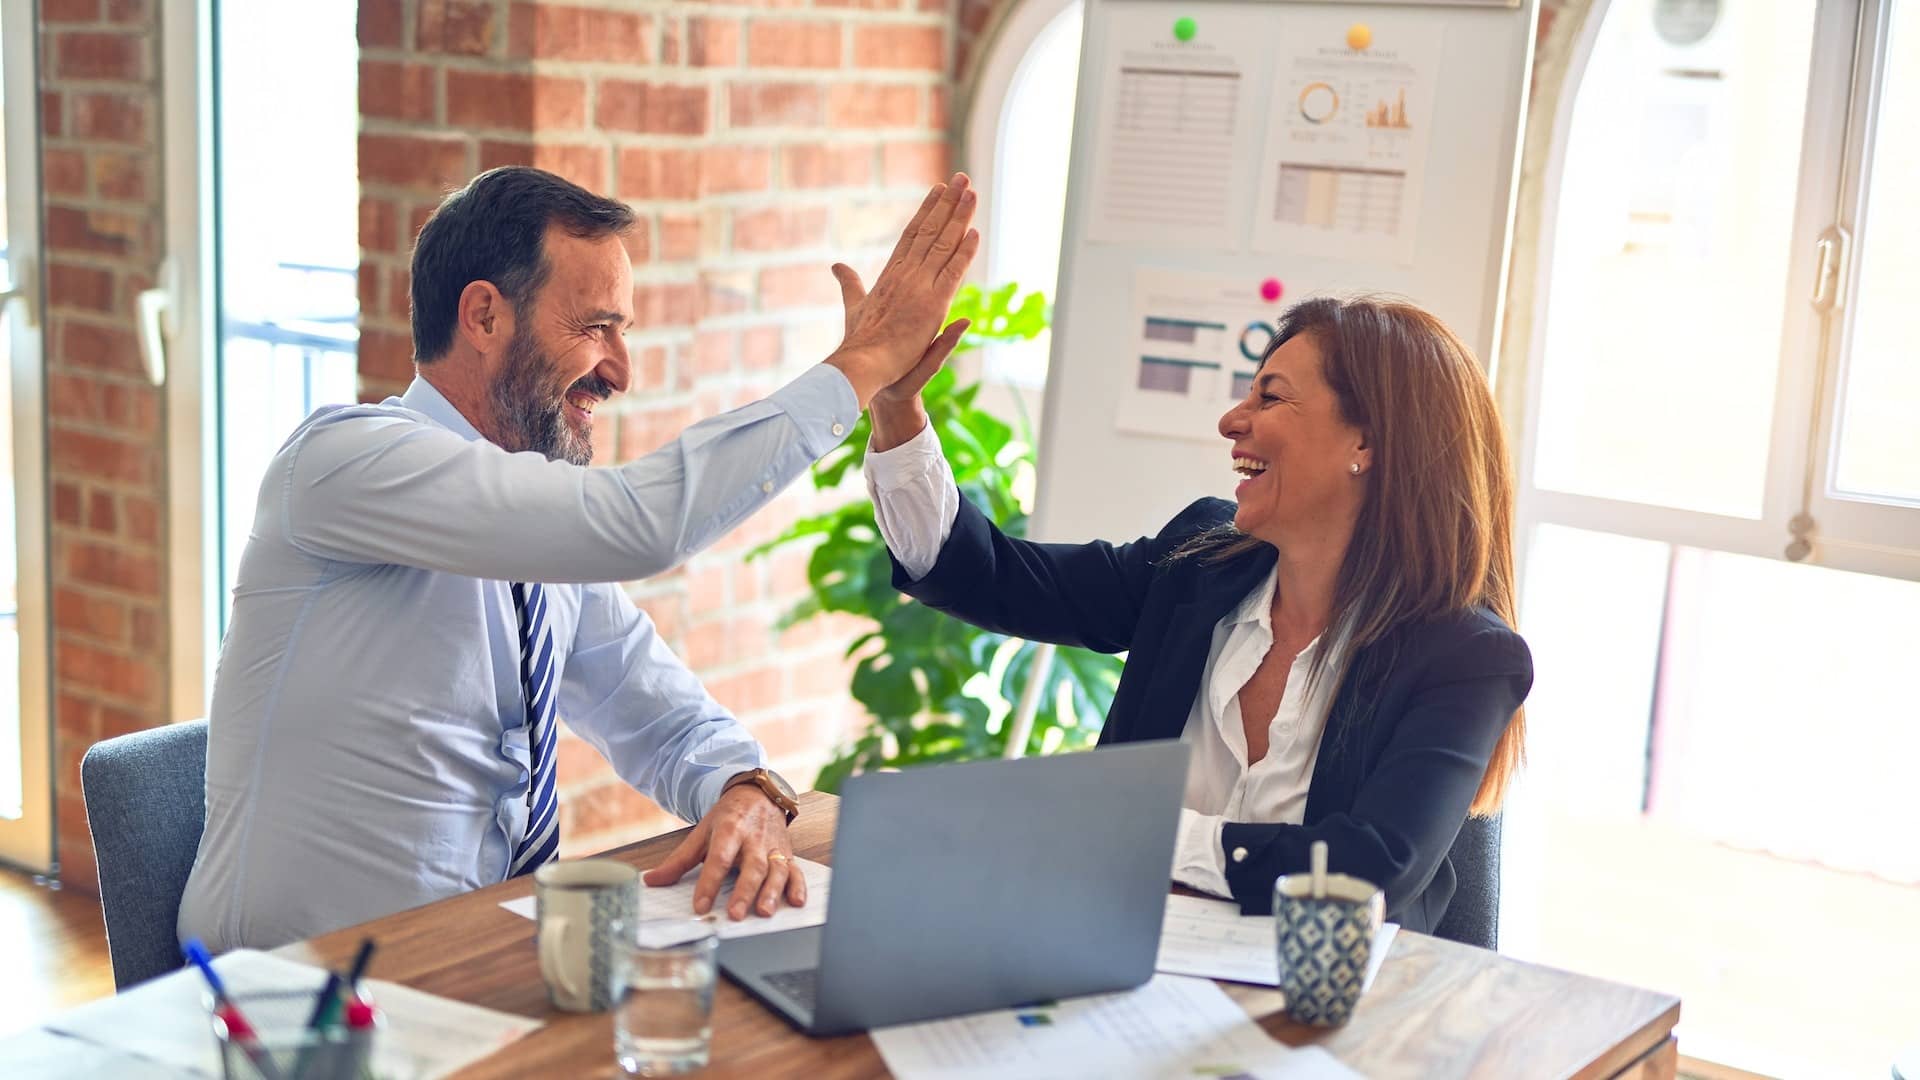 Image: A man and a woman in a professional office, high fiving